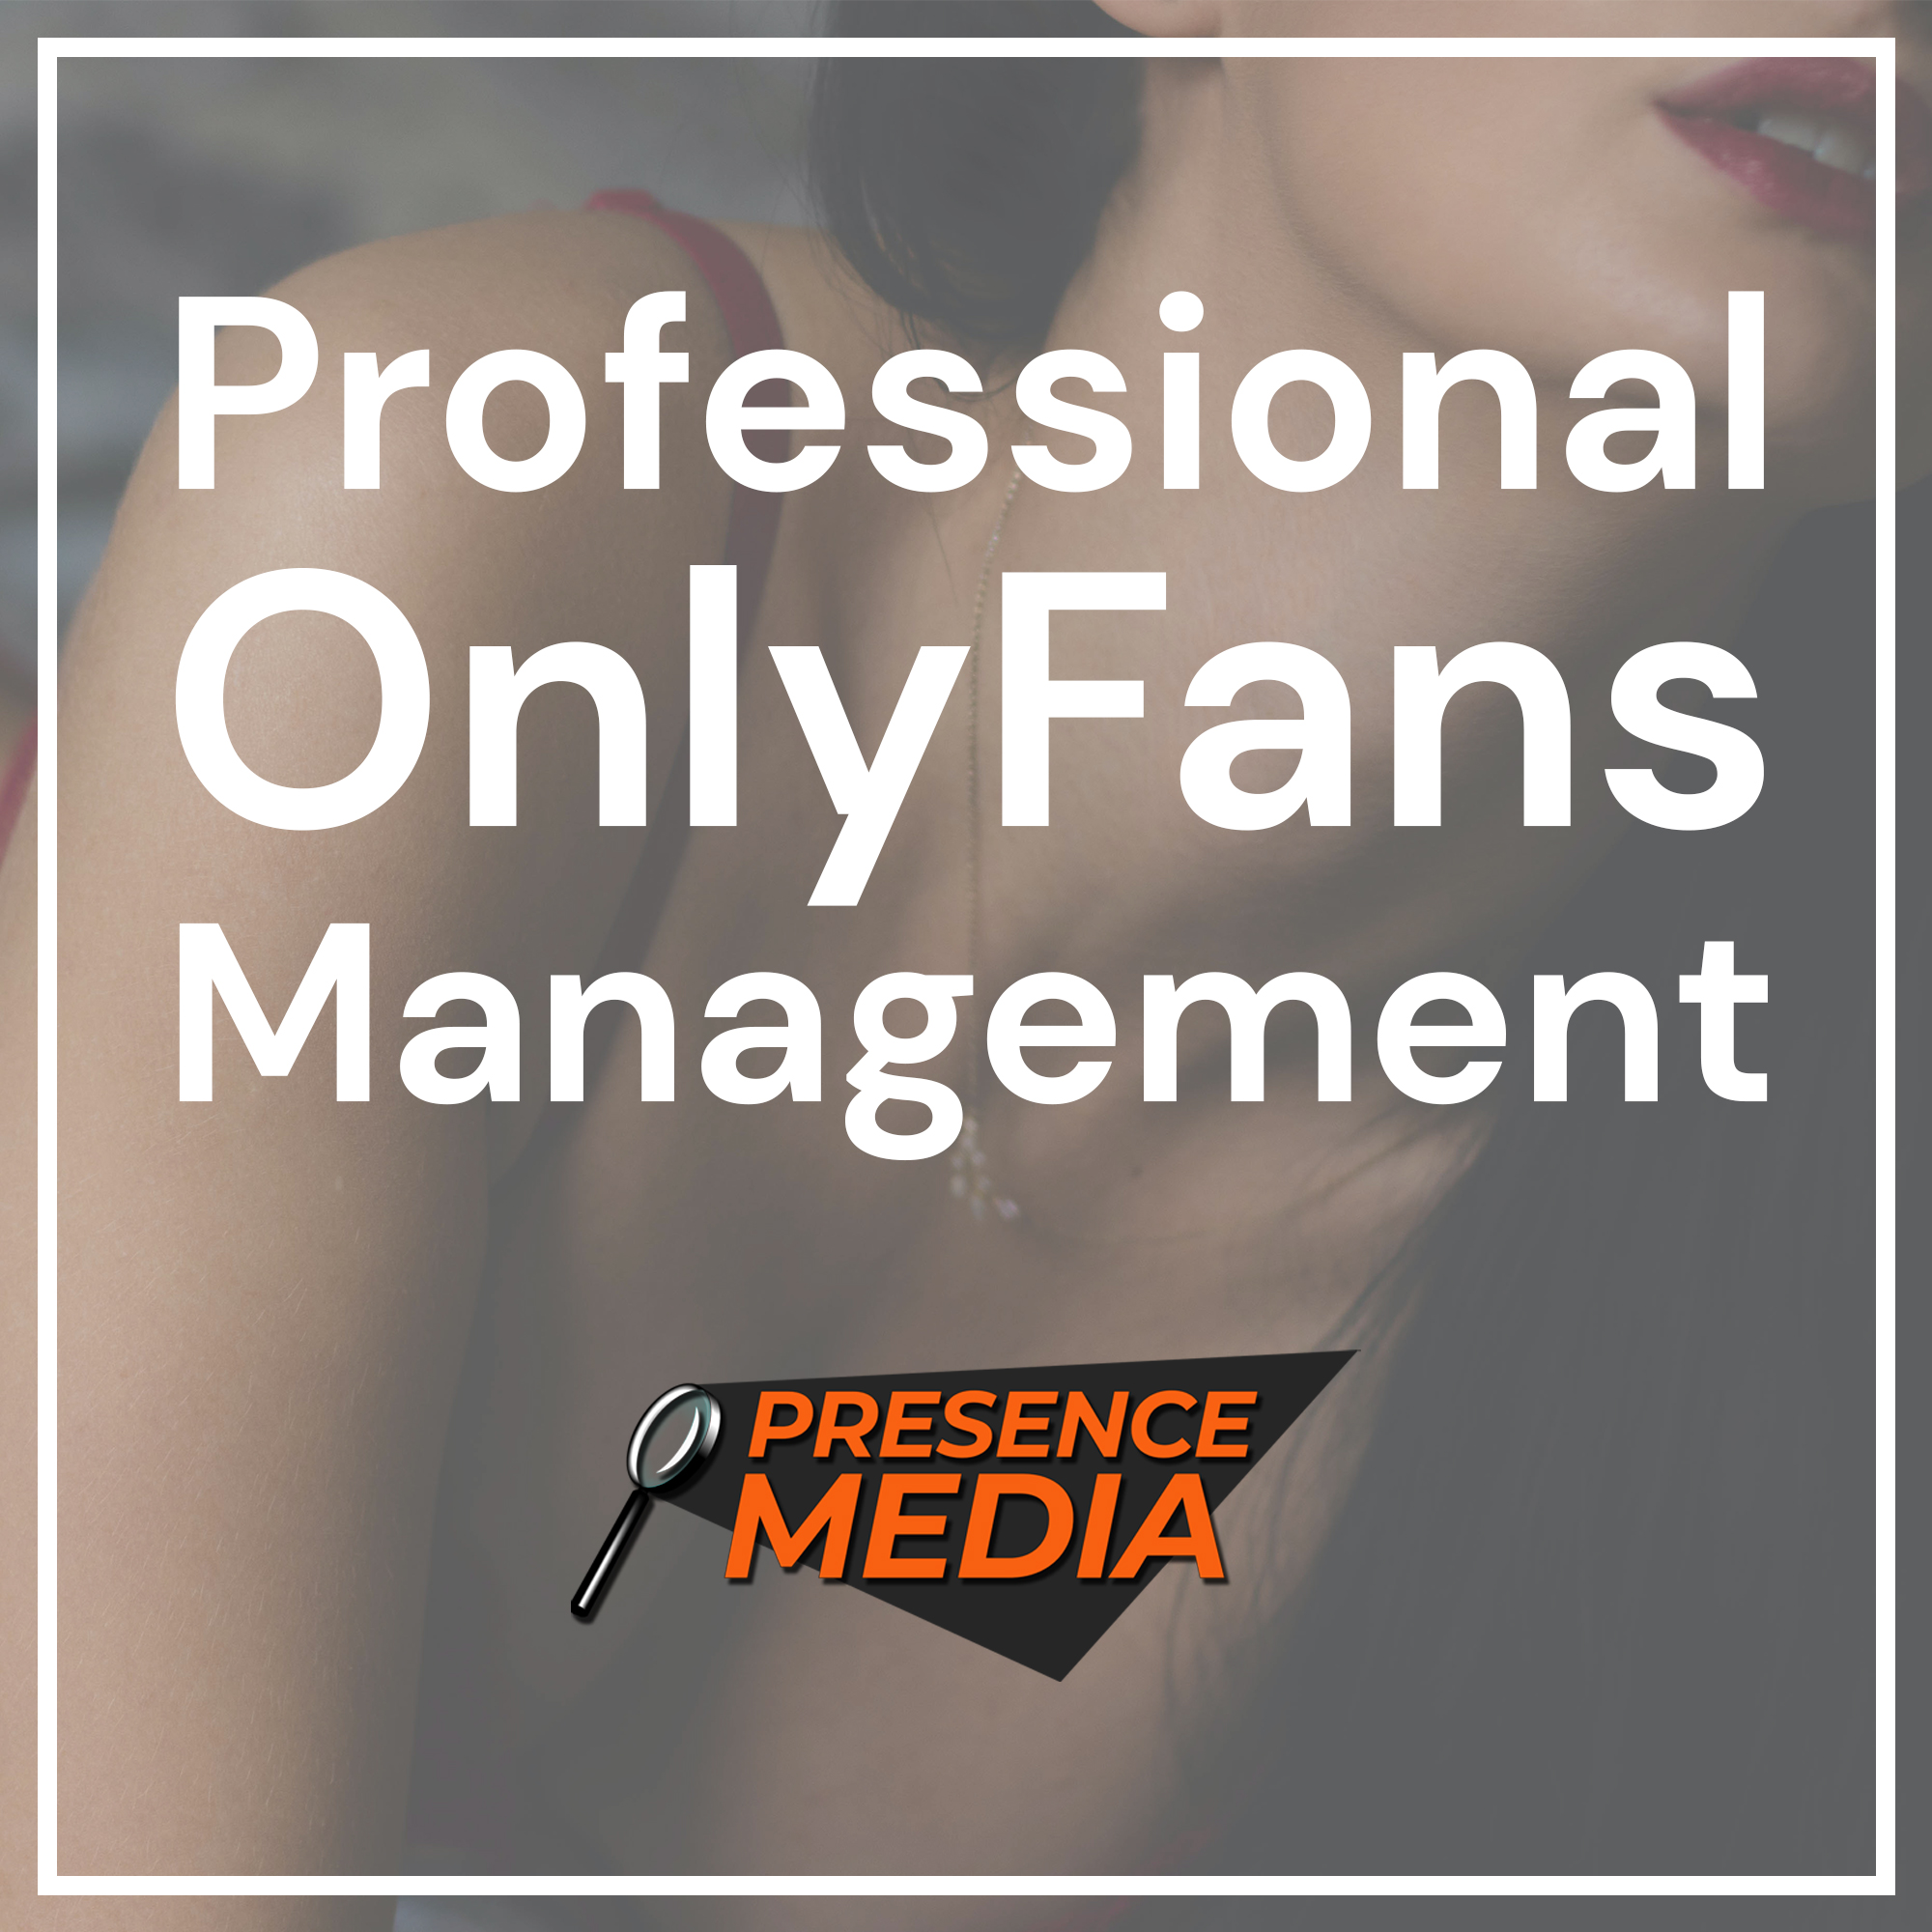 Only fans agency